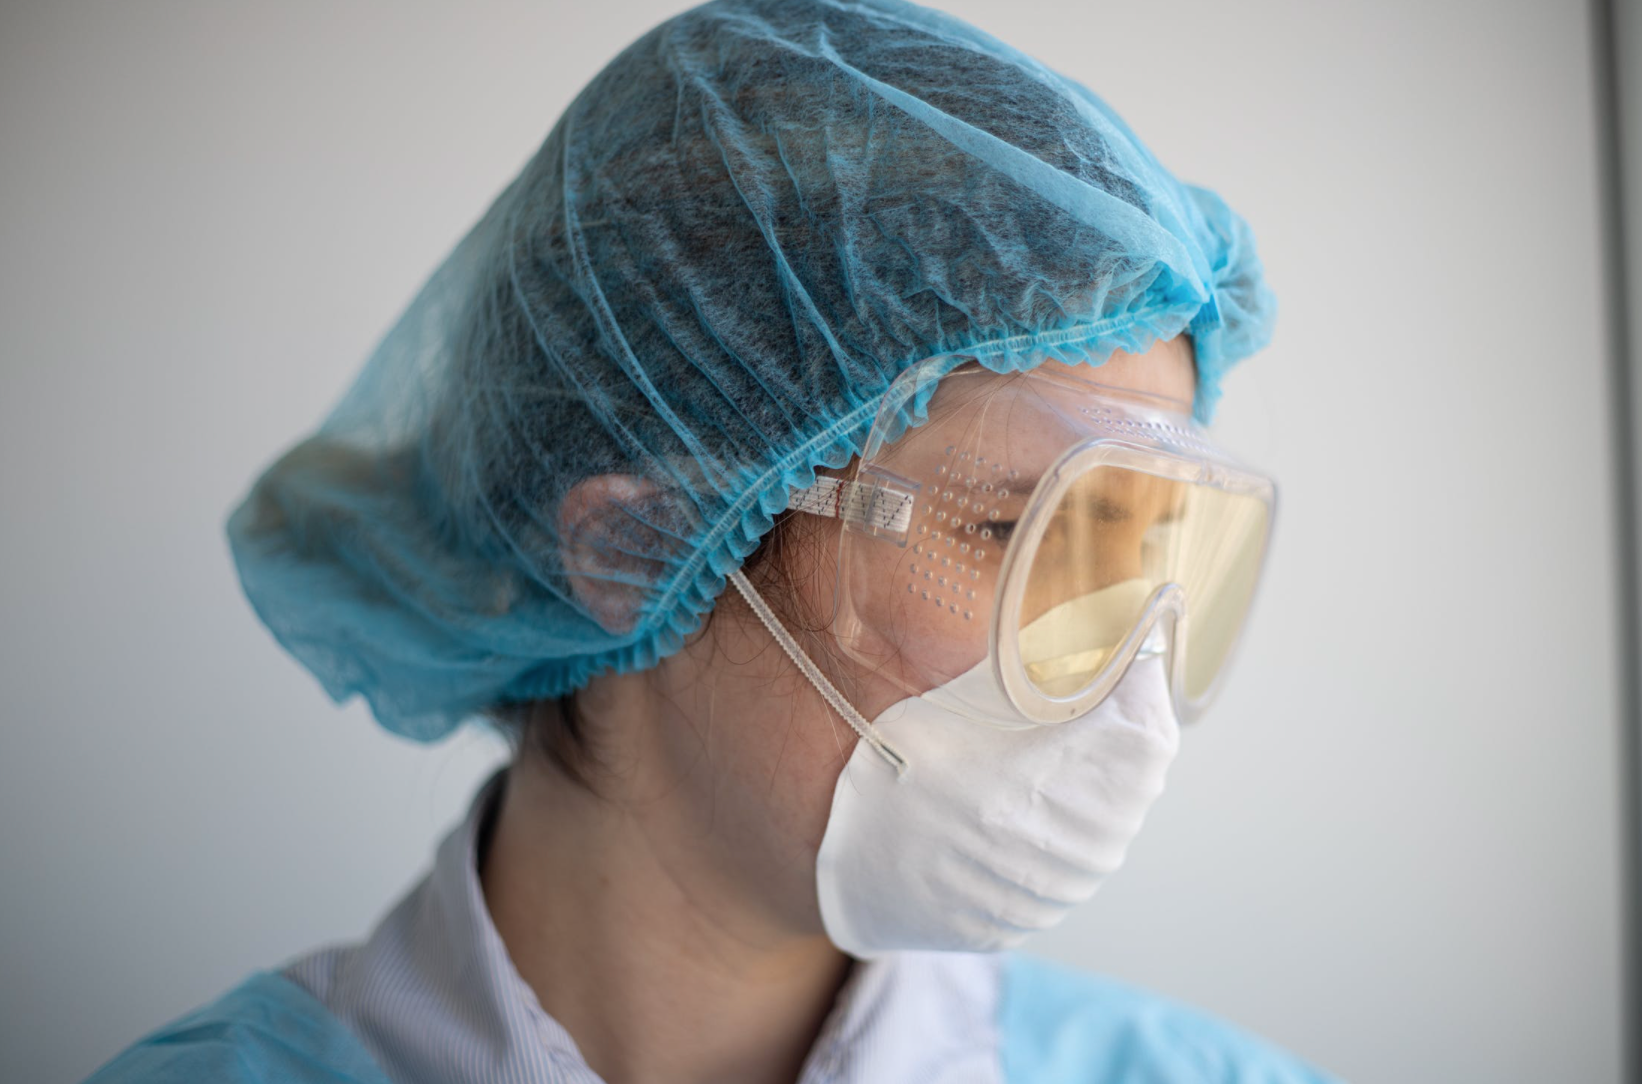 Pharmaceutical scientist who develops collagen protein is wearing personal protective equipment